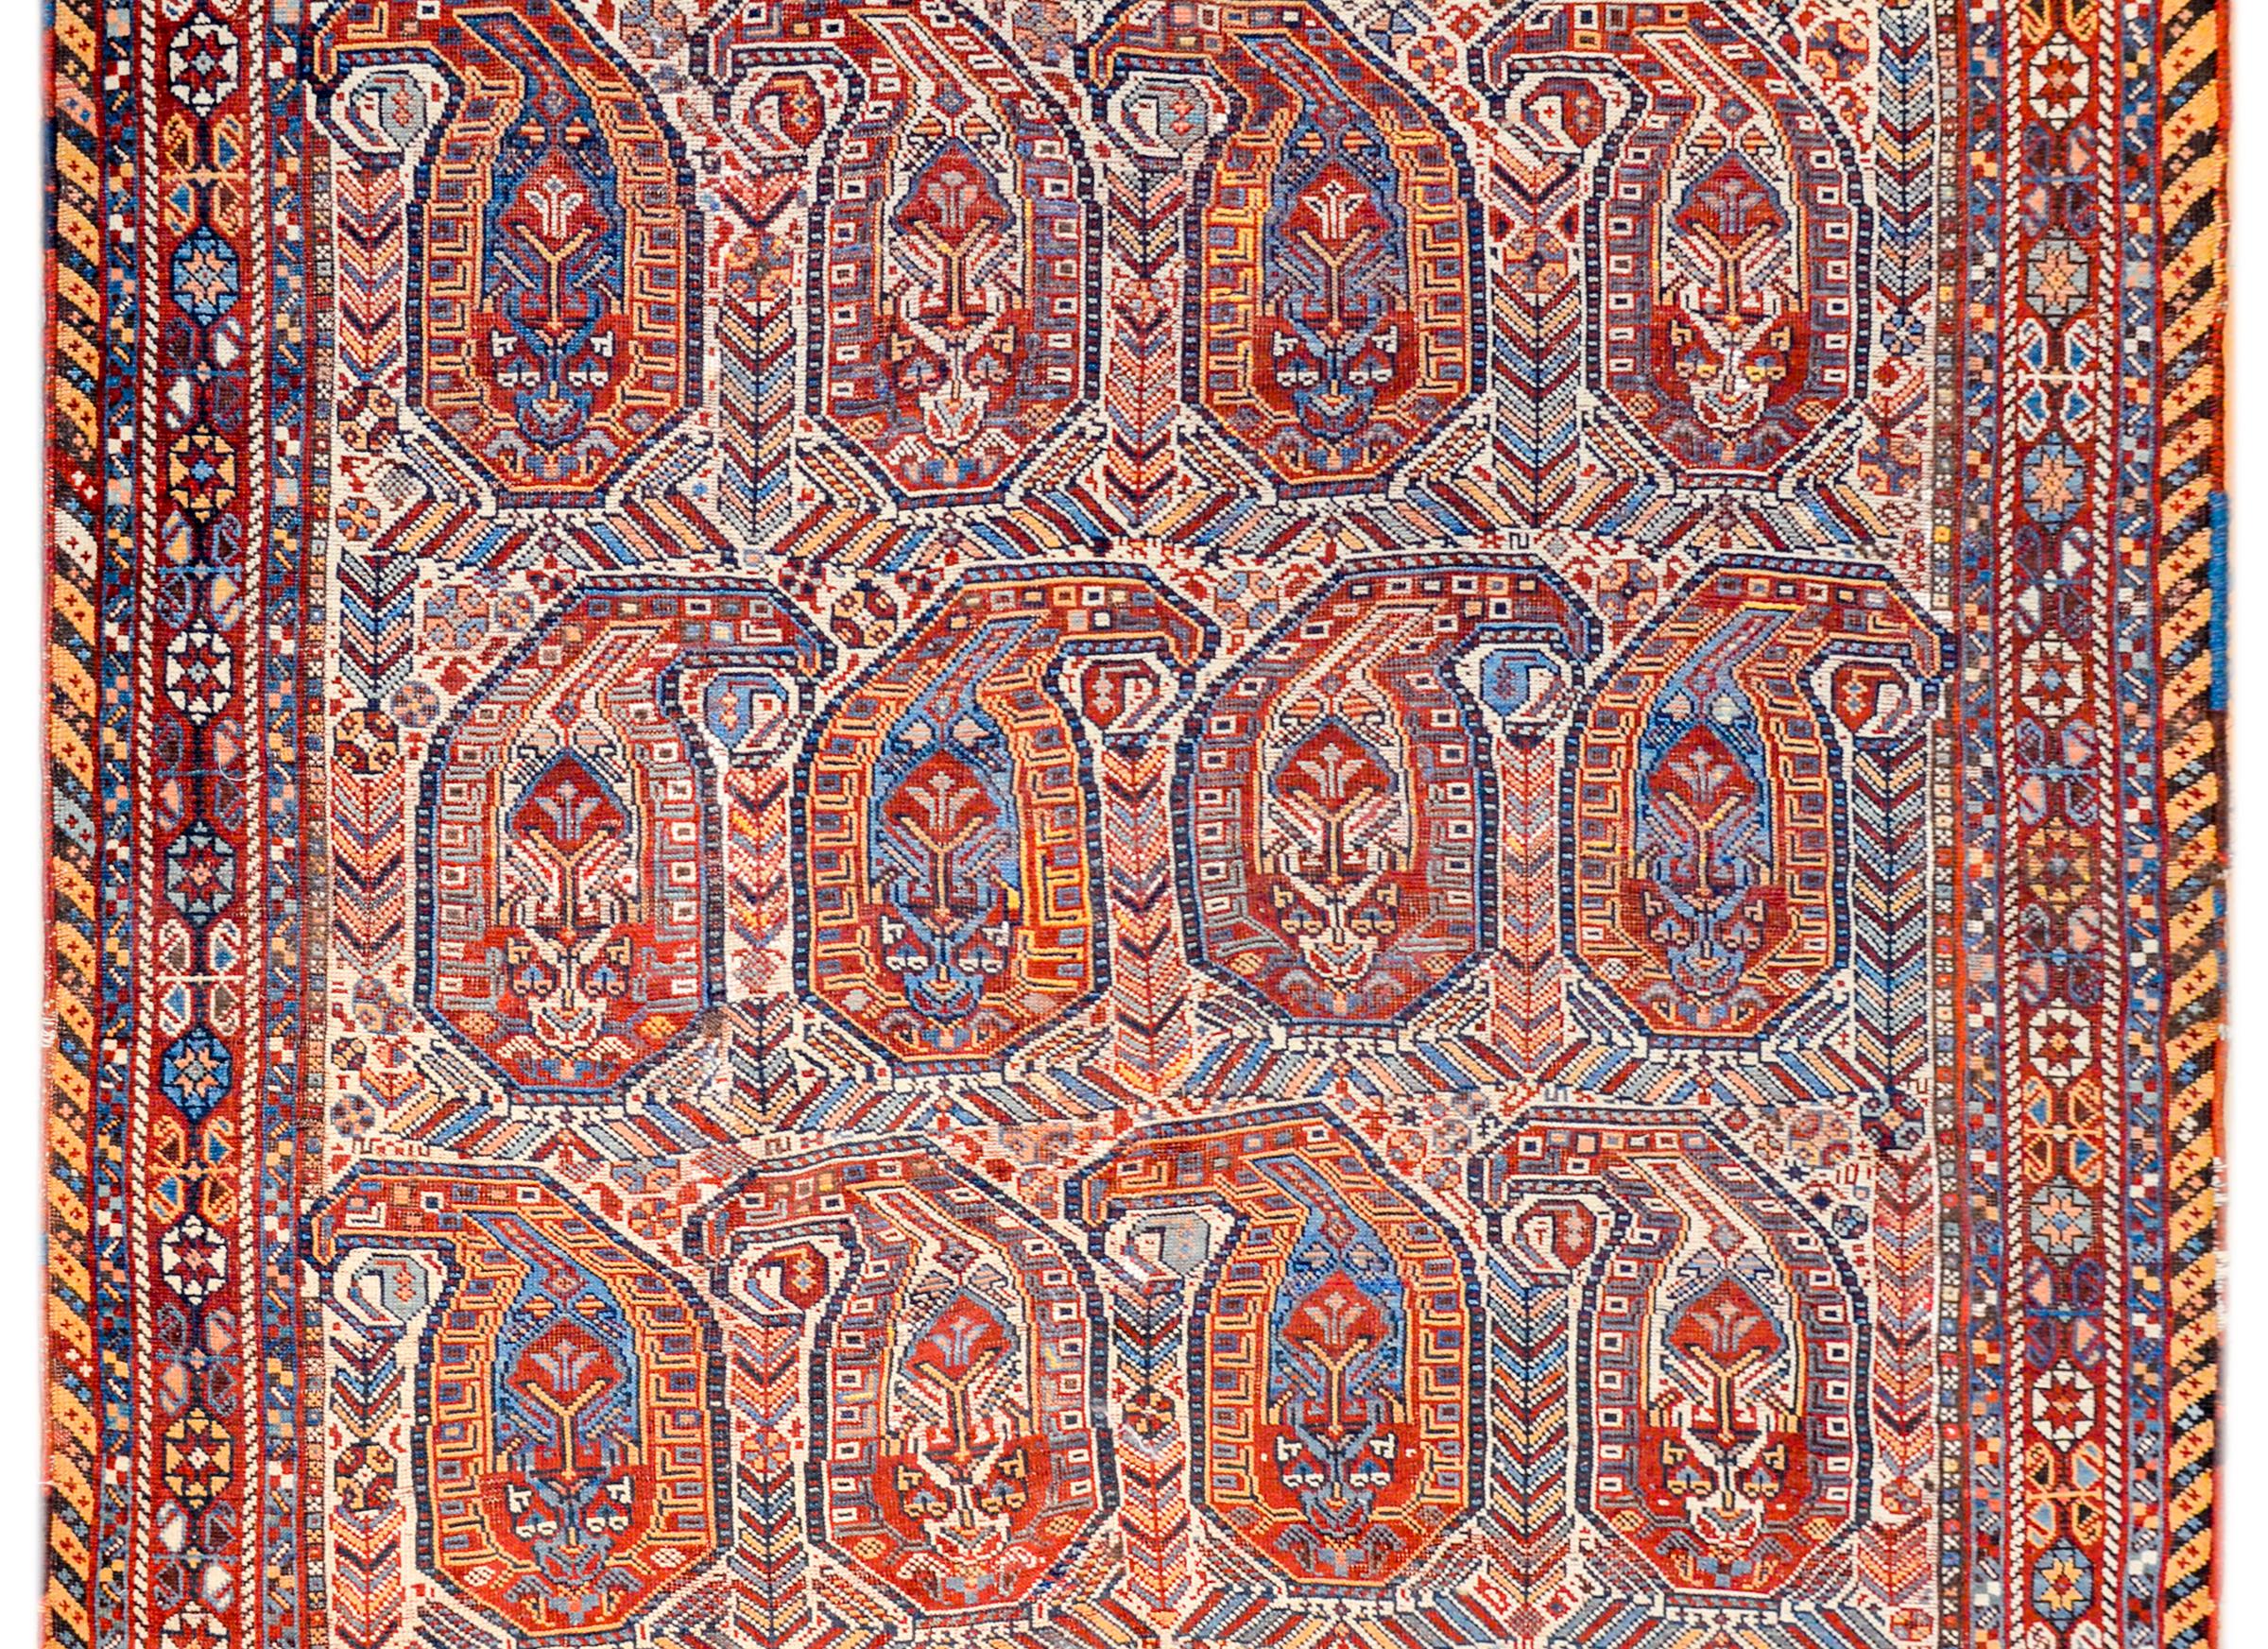 An unbelievable early 20th century Persian Gashgaei rug with an all-over large scale paisley pattern woven in crimson, gold, indigo, coral, black, and white colored vegetable dyed wool. The border is outstanding, with a tightly woven pattern